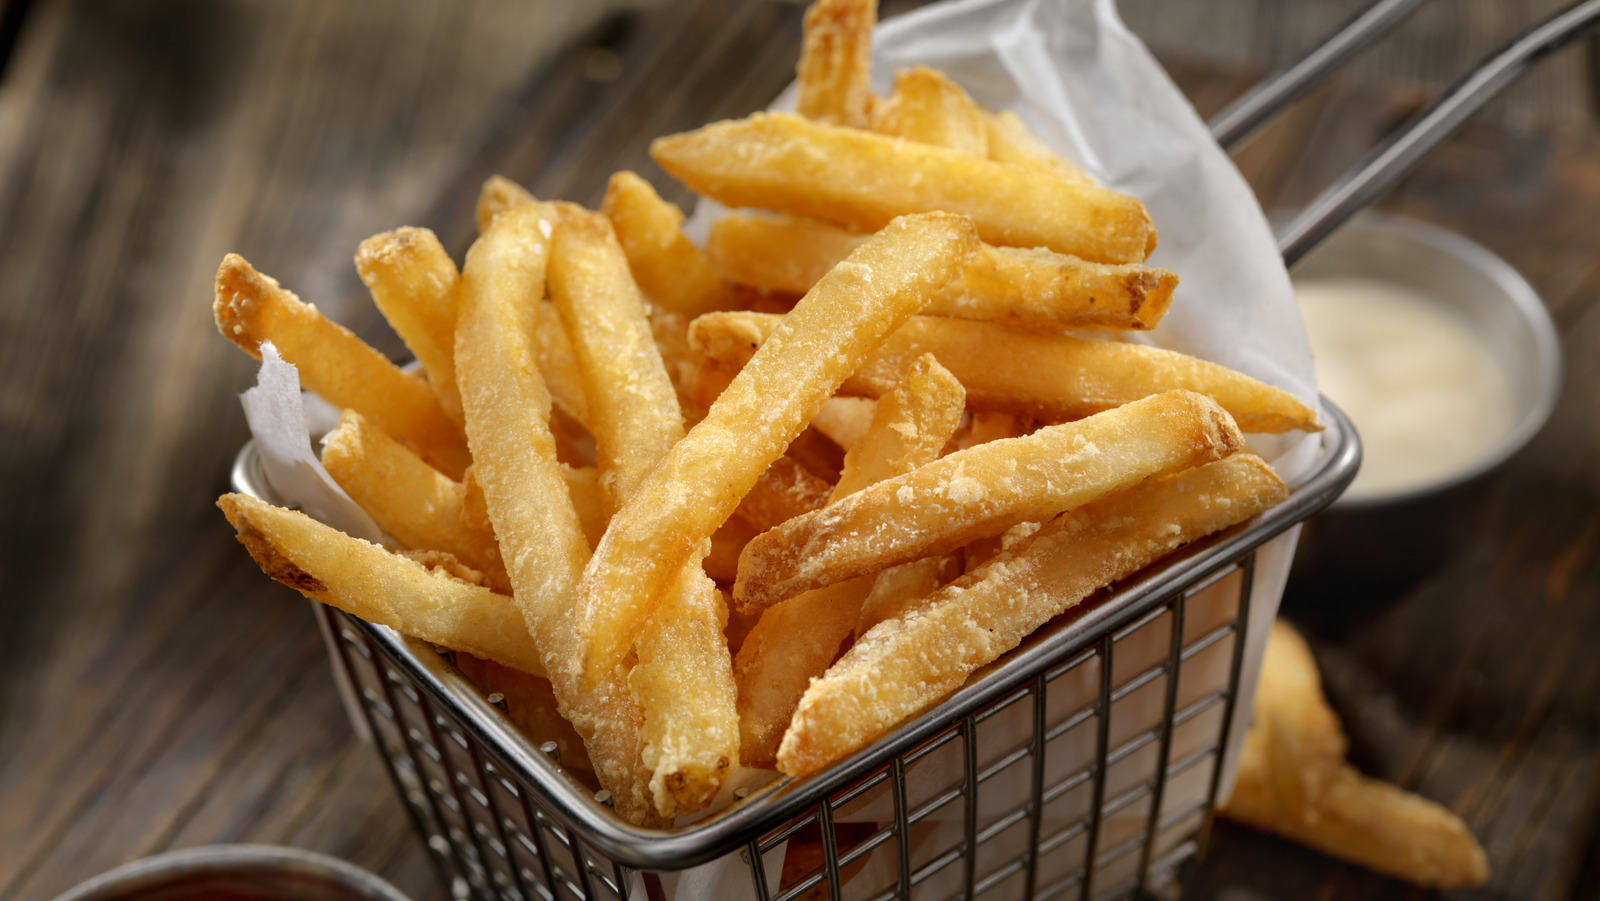 Does The Shape Of A French Fry Change Its Taste At All?